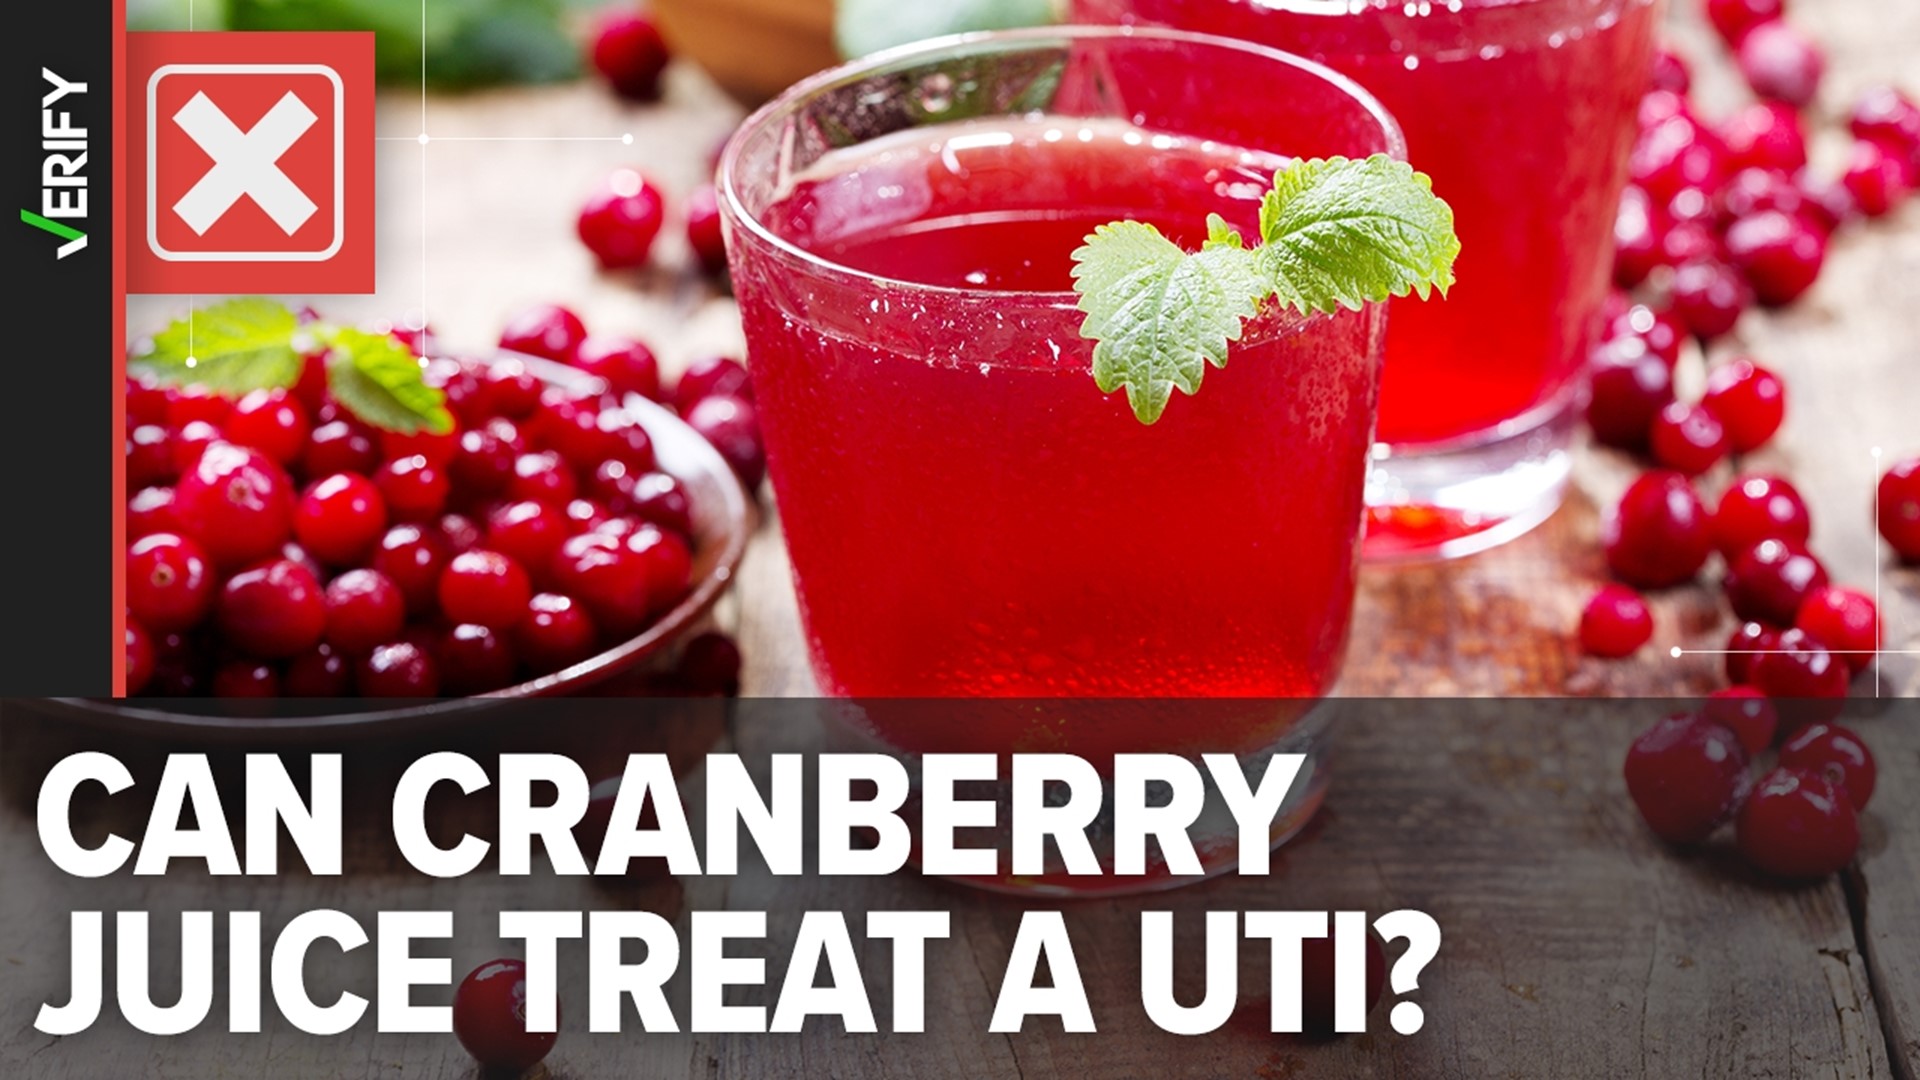 Studies show a substance in cranberries can prevent bacteria from sticking to the bladder and causing a UTI. There’s no evidence cranberry can treat one.